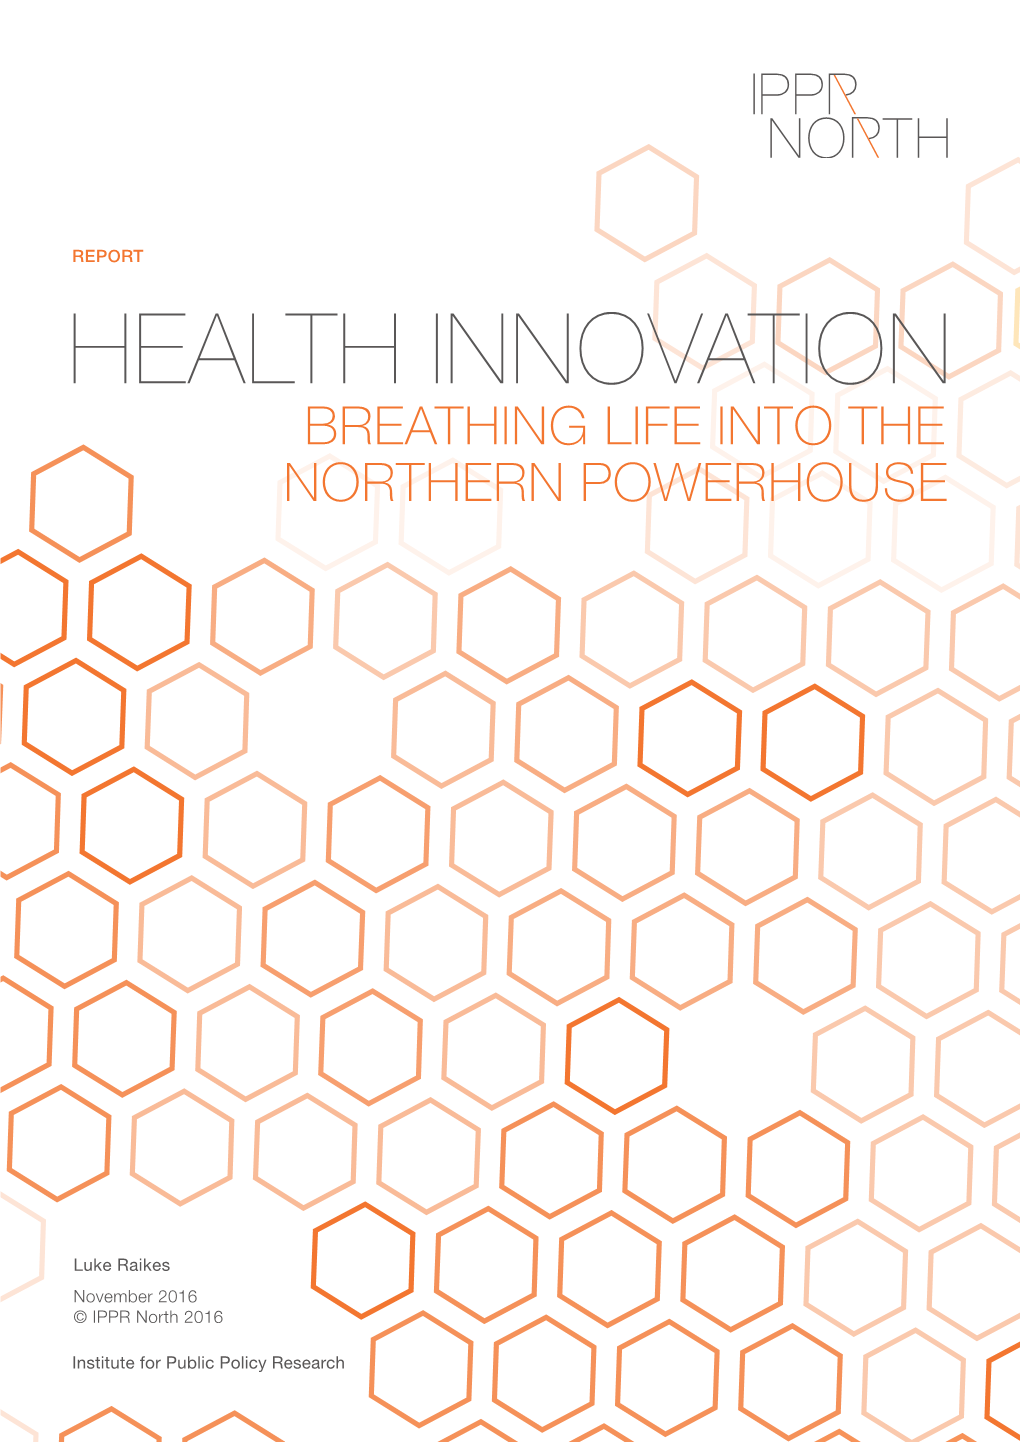 Health Innovation: Breathing Life Into the Northern Powerhouse ABOUT the AUTHOR Luke Raikes Is a Research Fellow at IPPR